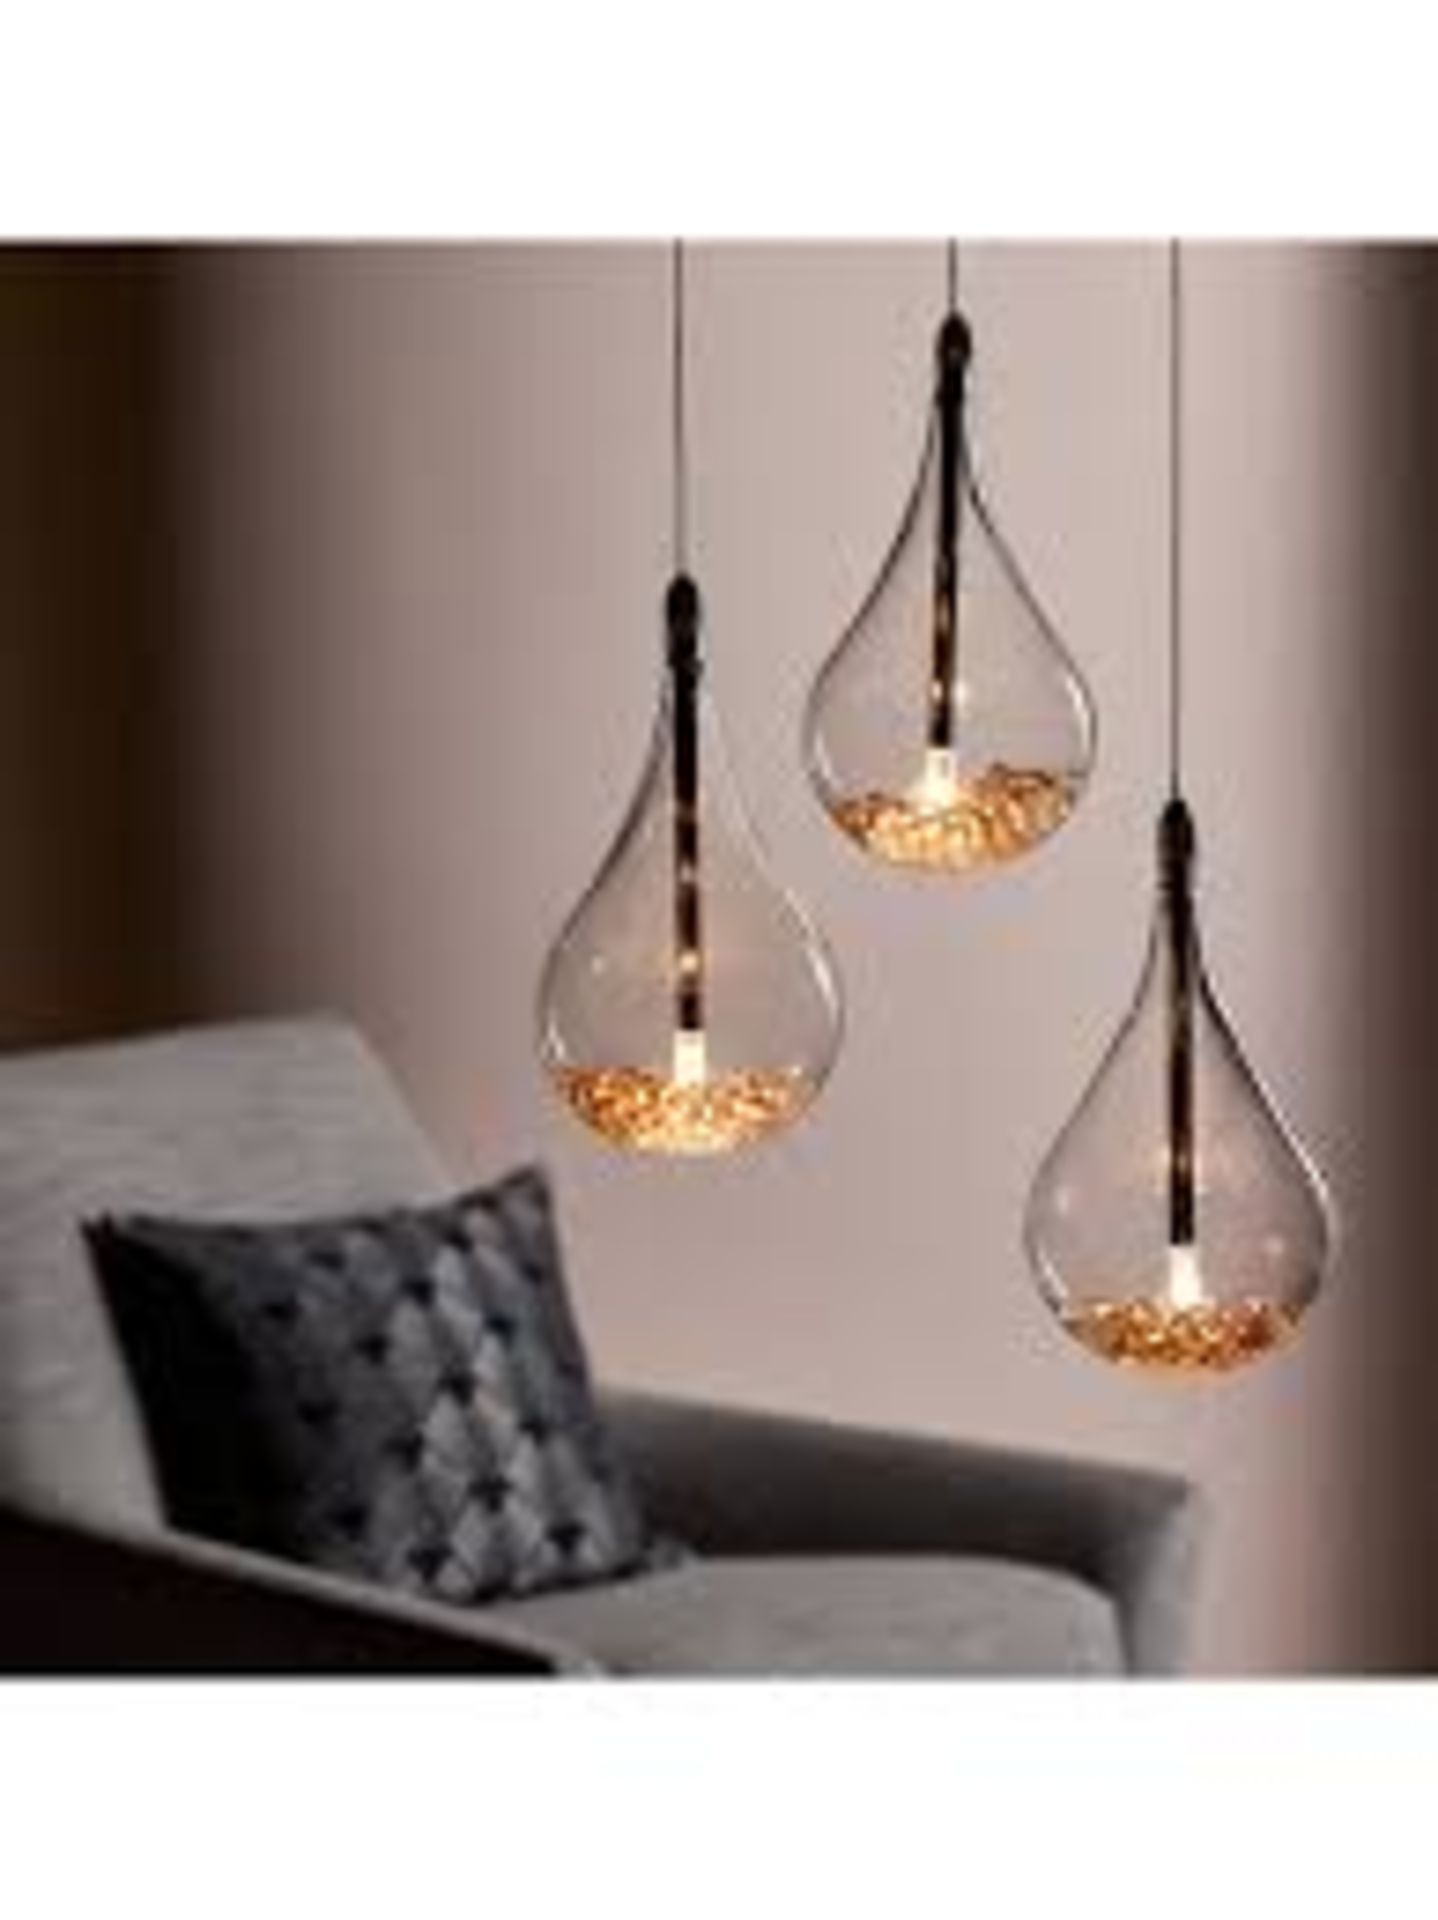 Boxed Sebastian Chrome Finish Glass Ceiling Light Fitting RRP £195 (2317807) (Viewings And